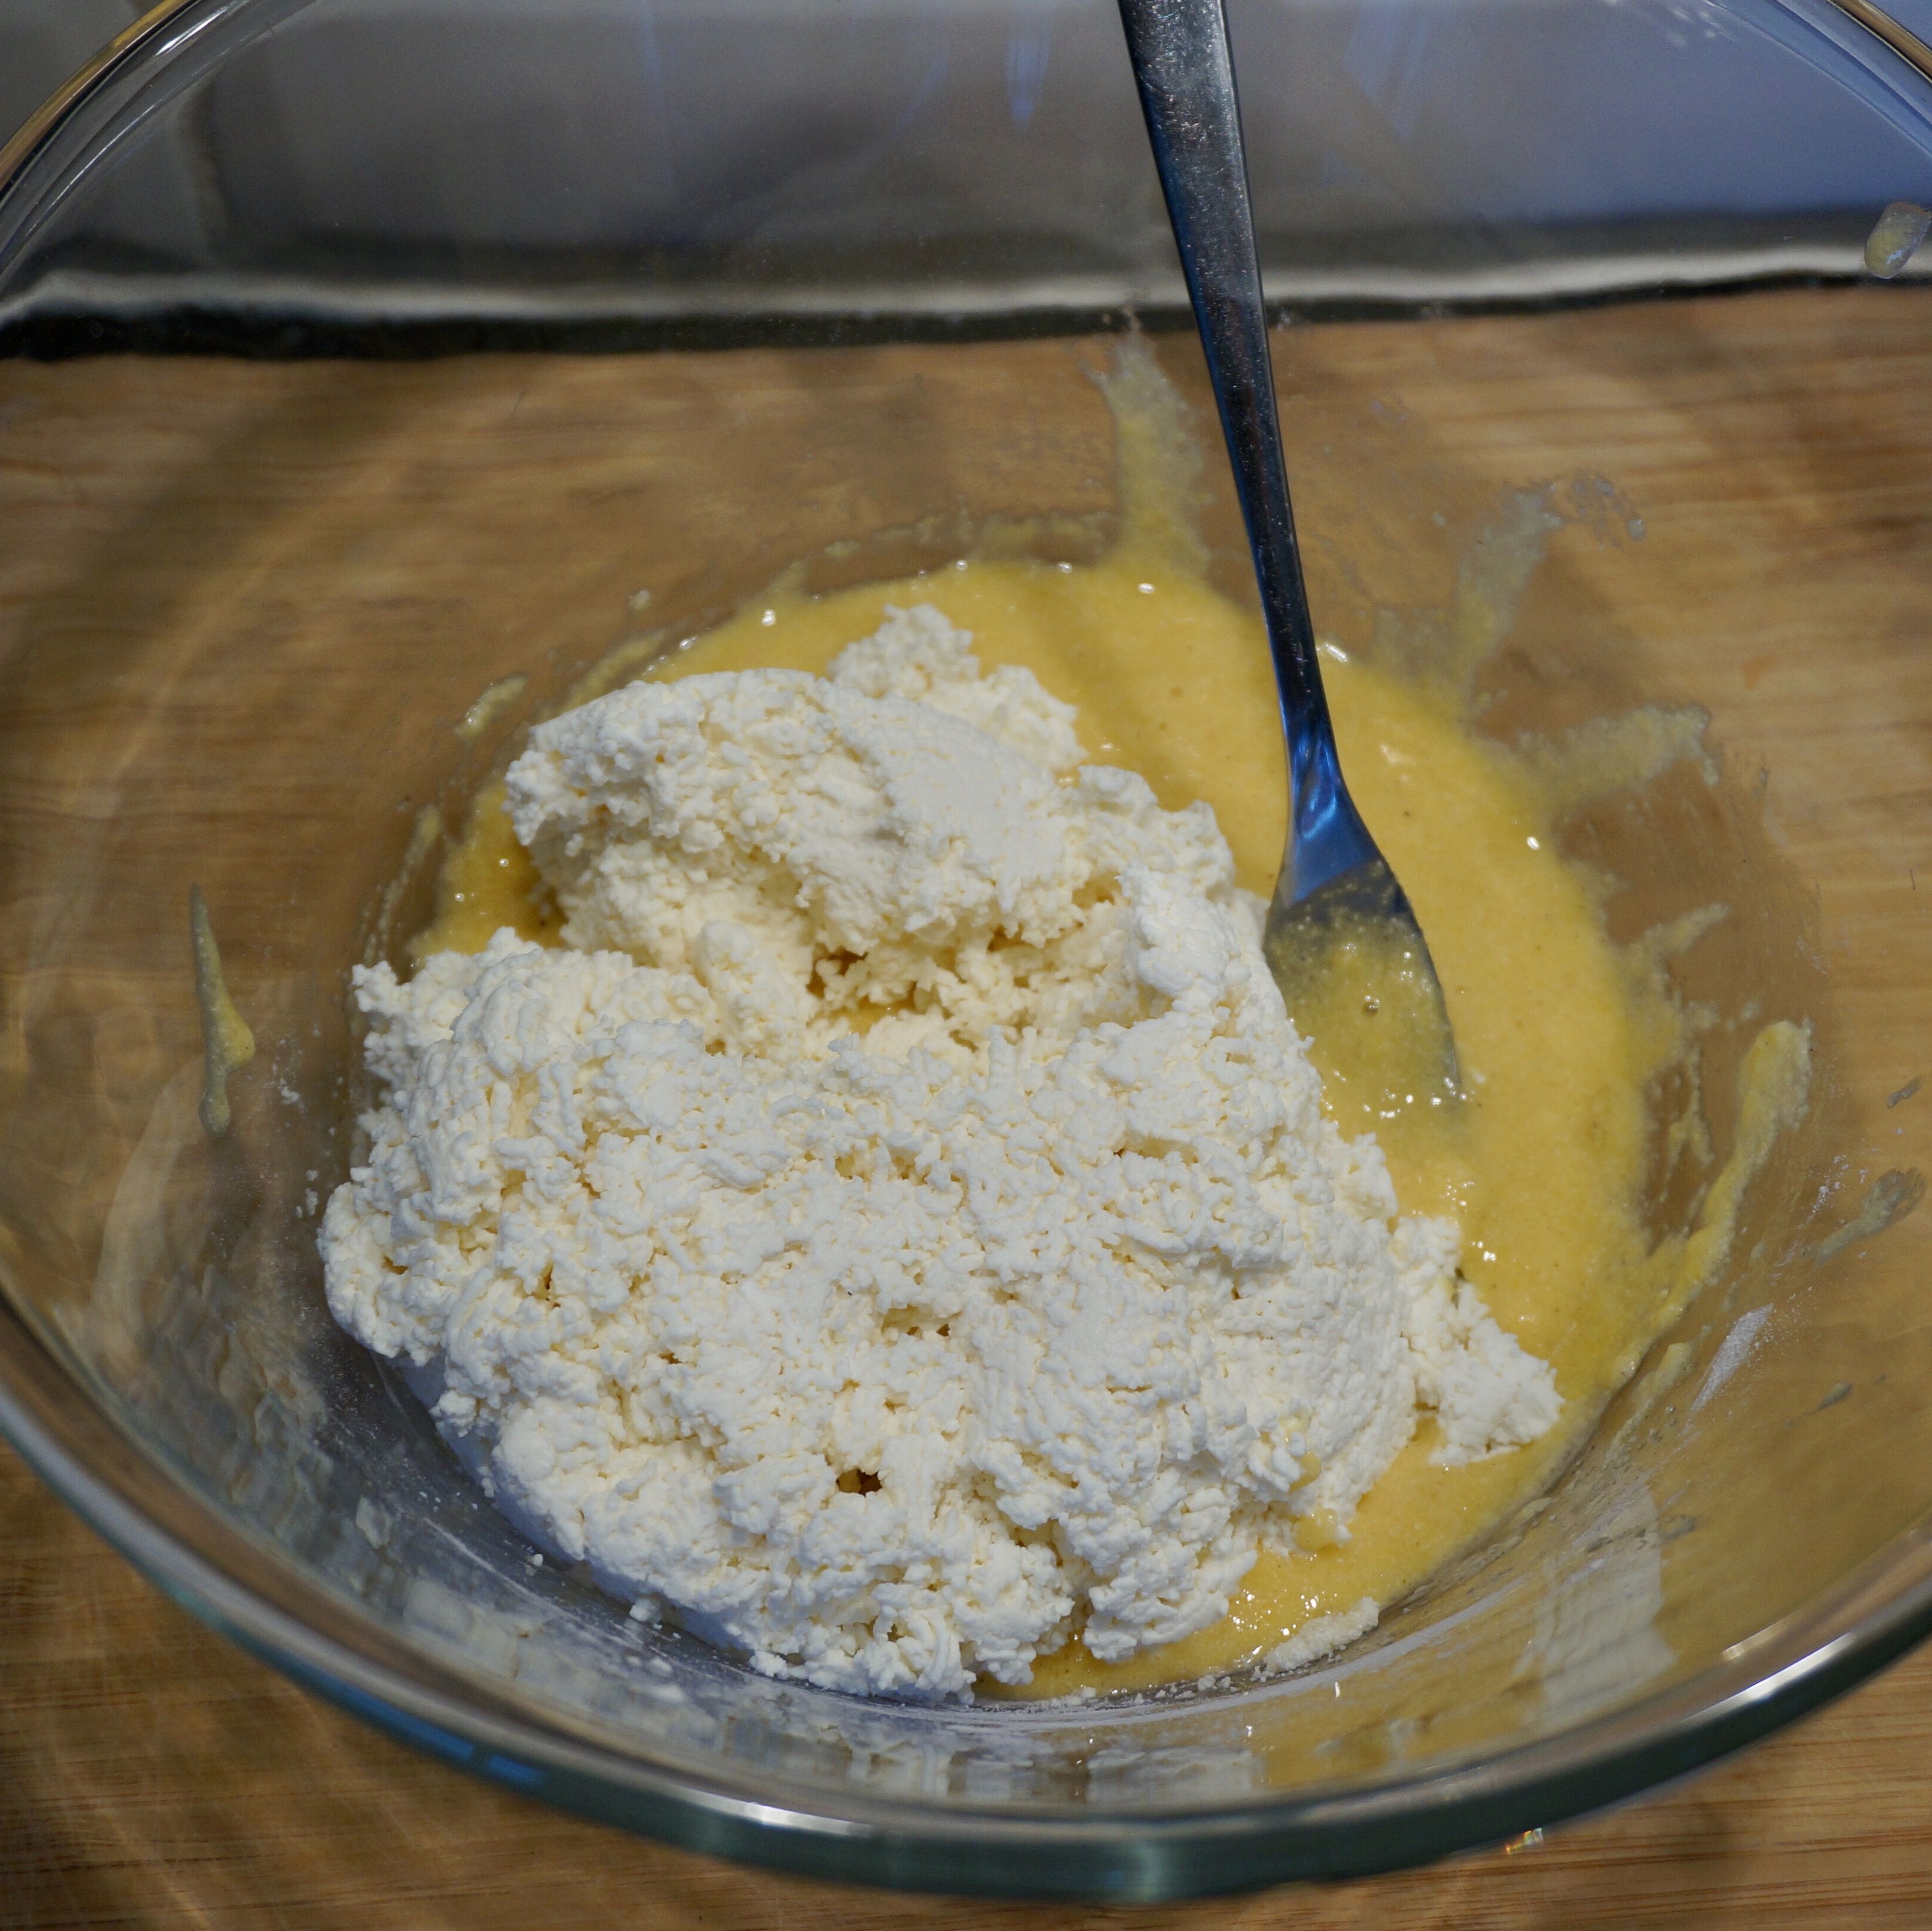 Add the quark and mix thoroughly. Let the mixture to rest for 2 minutes.